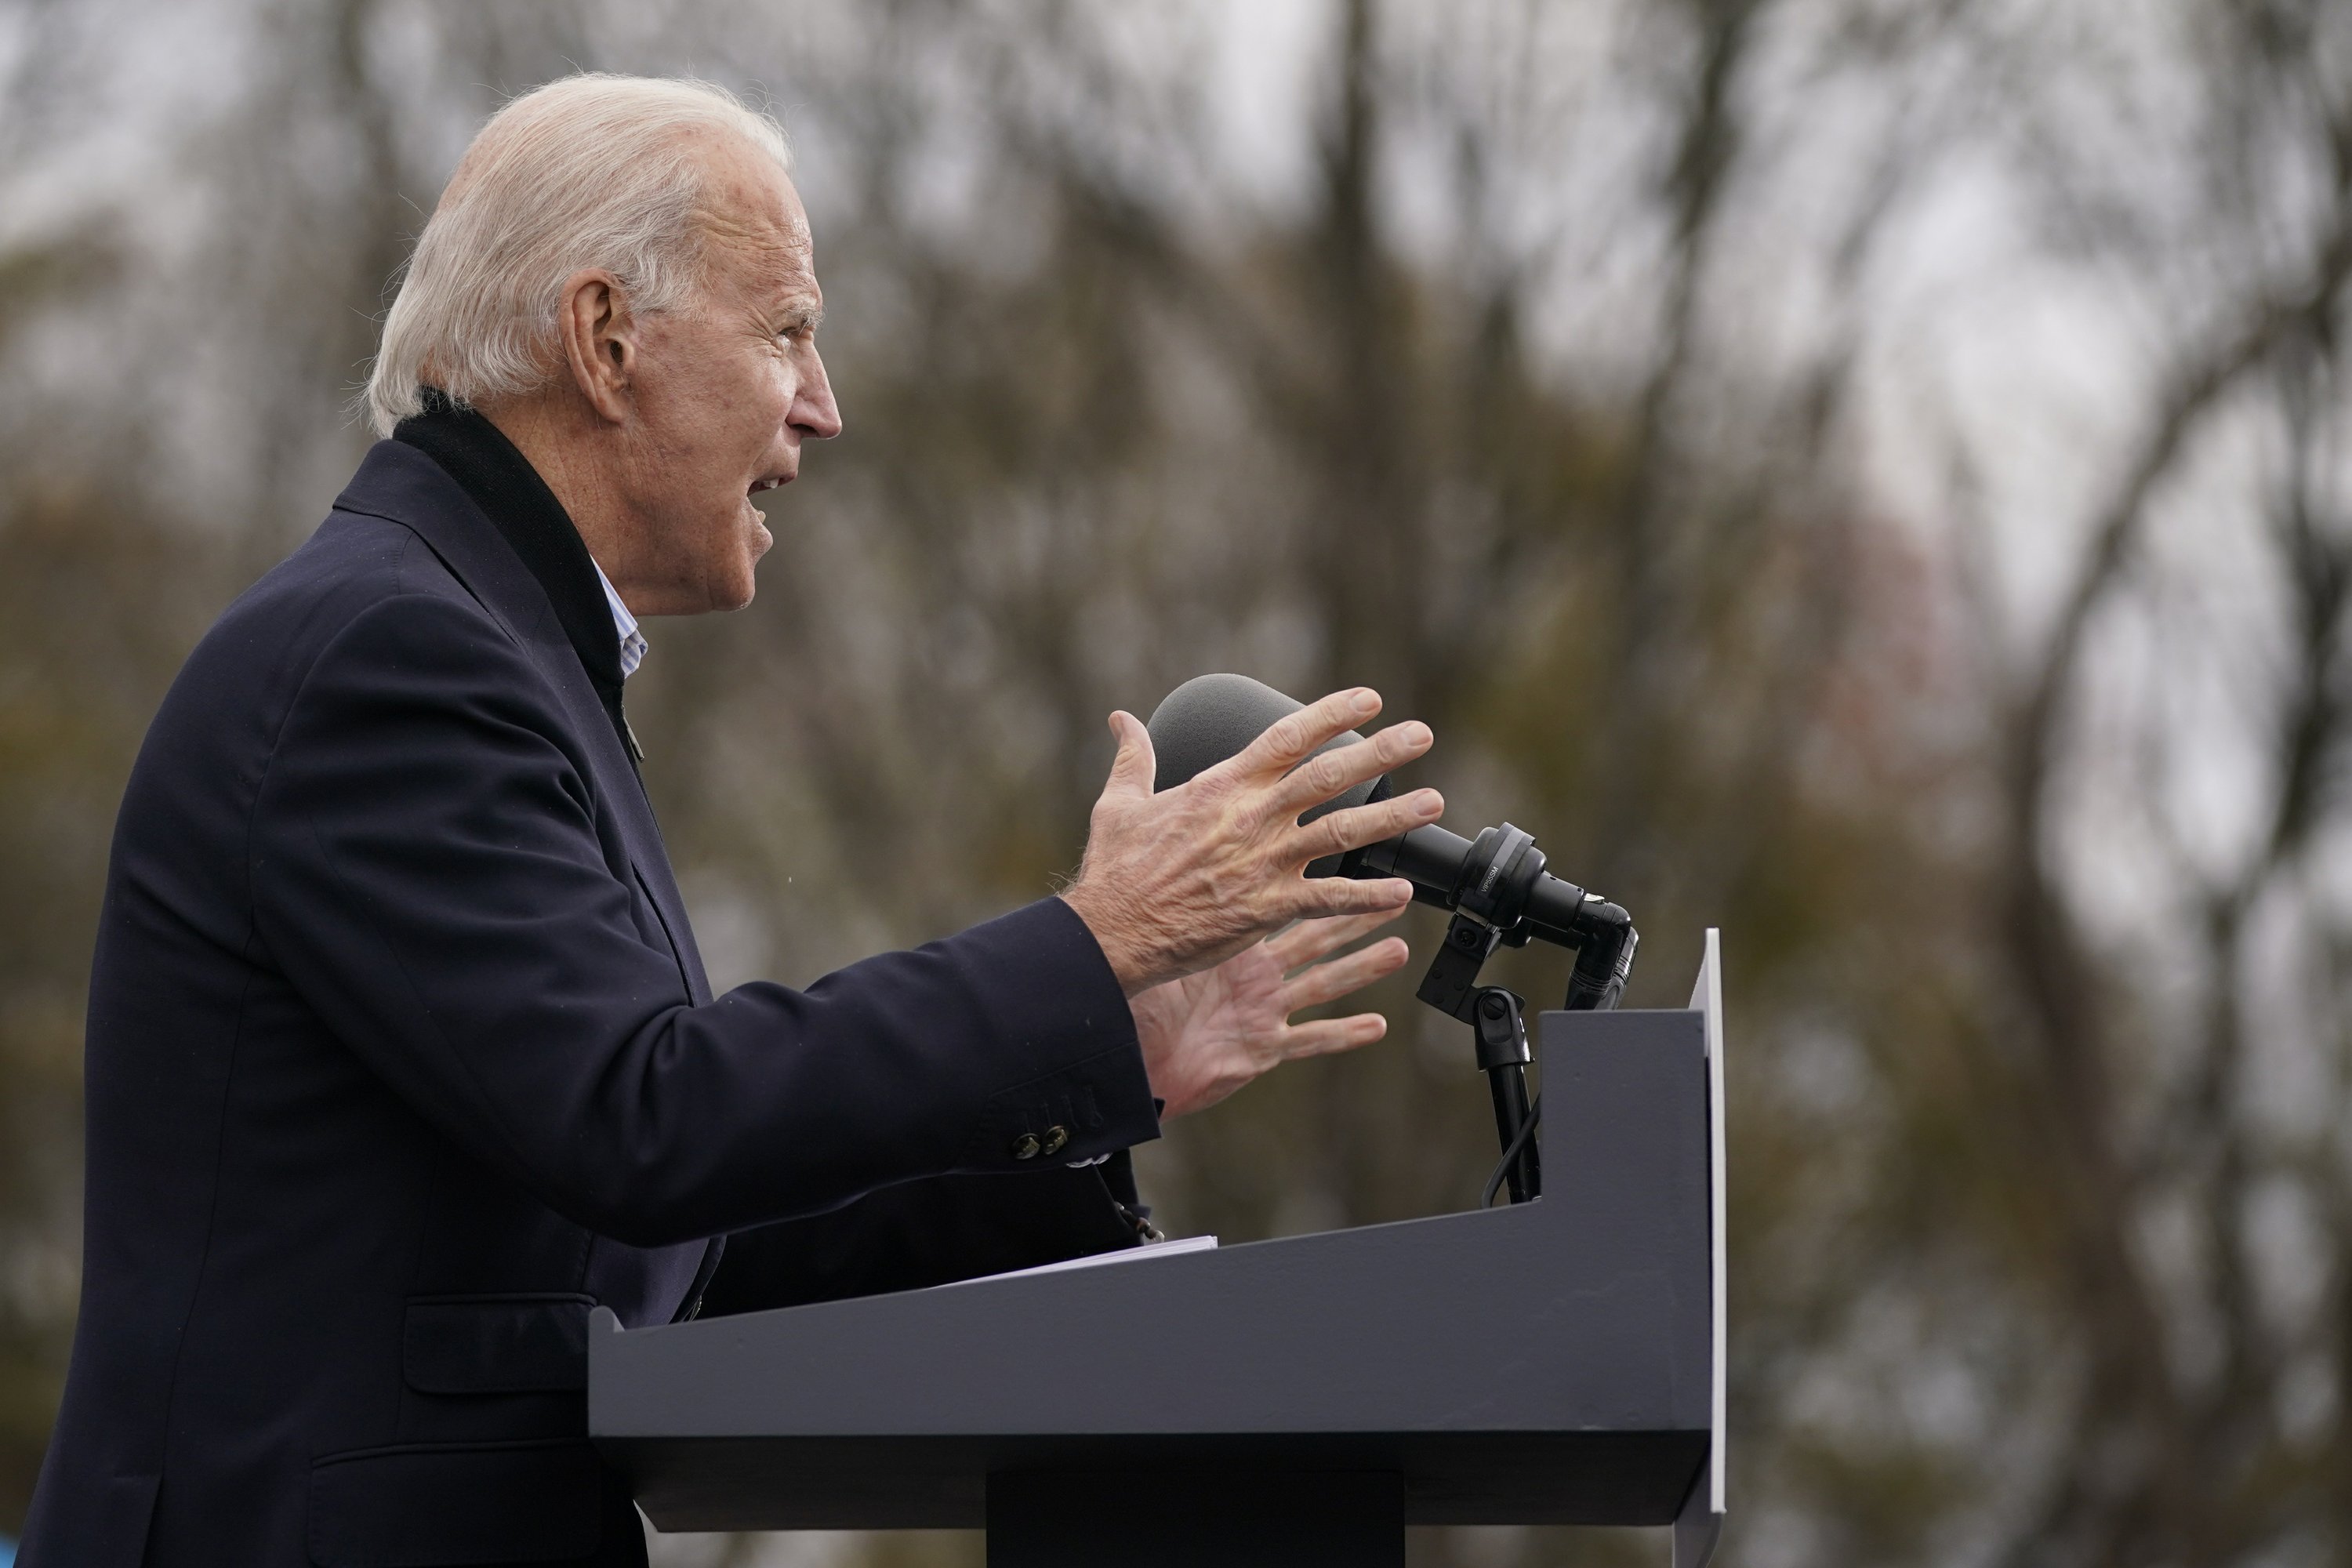 In Georgia, Biden’s presidency meets the early defining moment